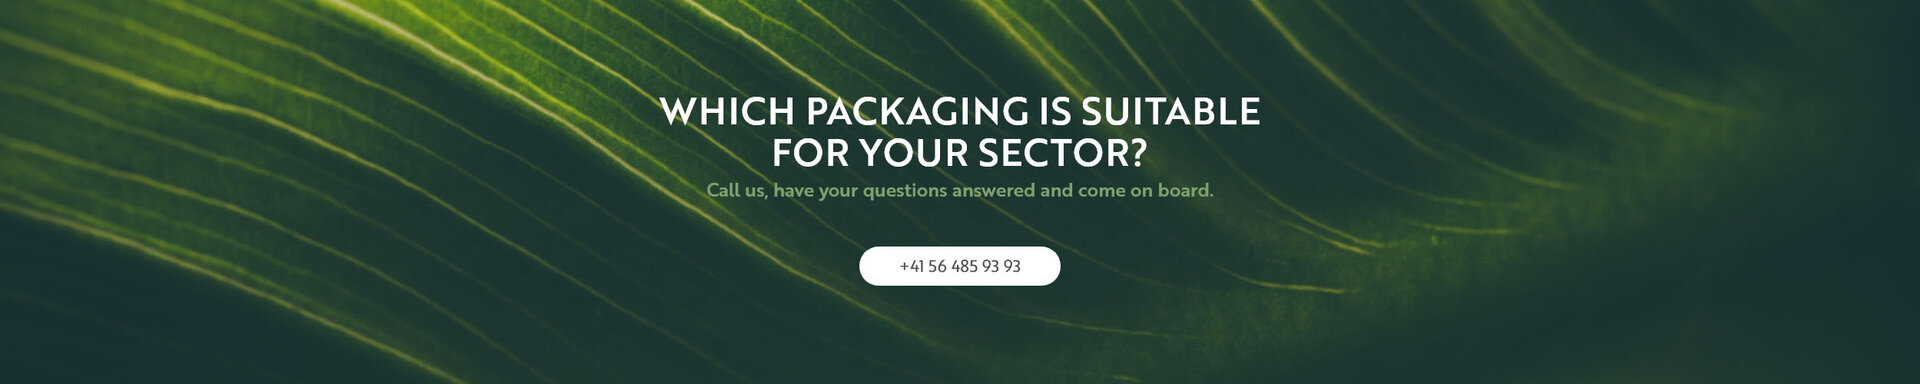 Which packaging ist suitable for your sector?